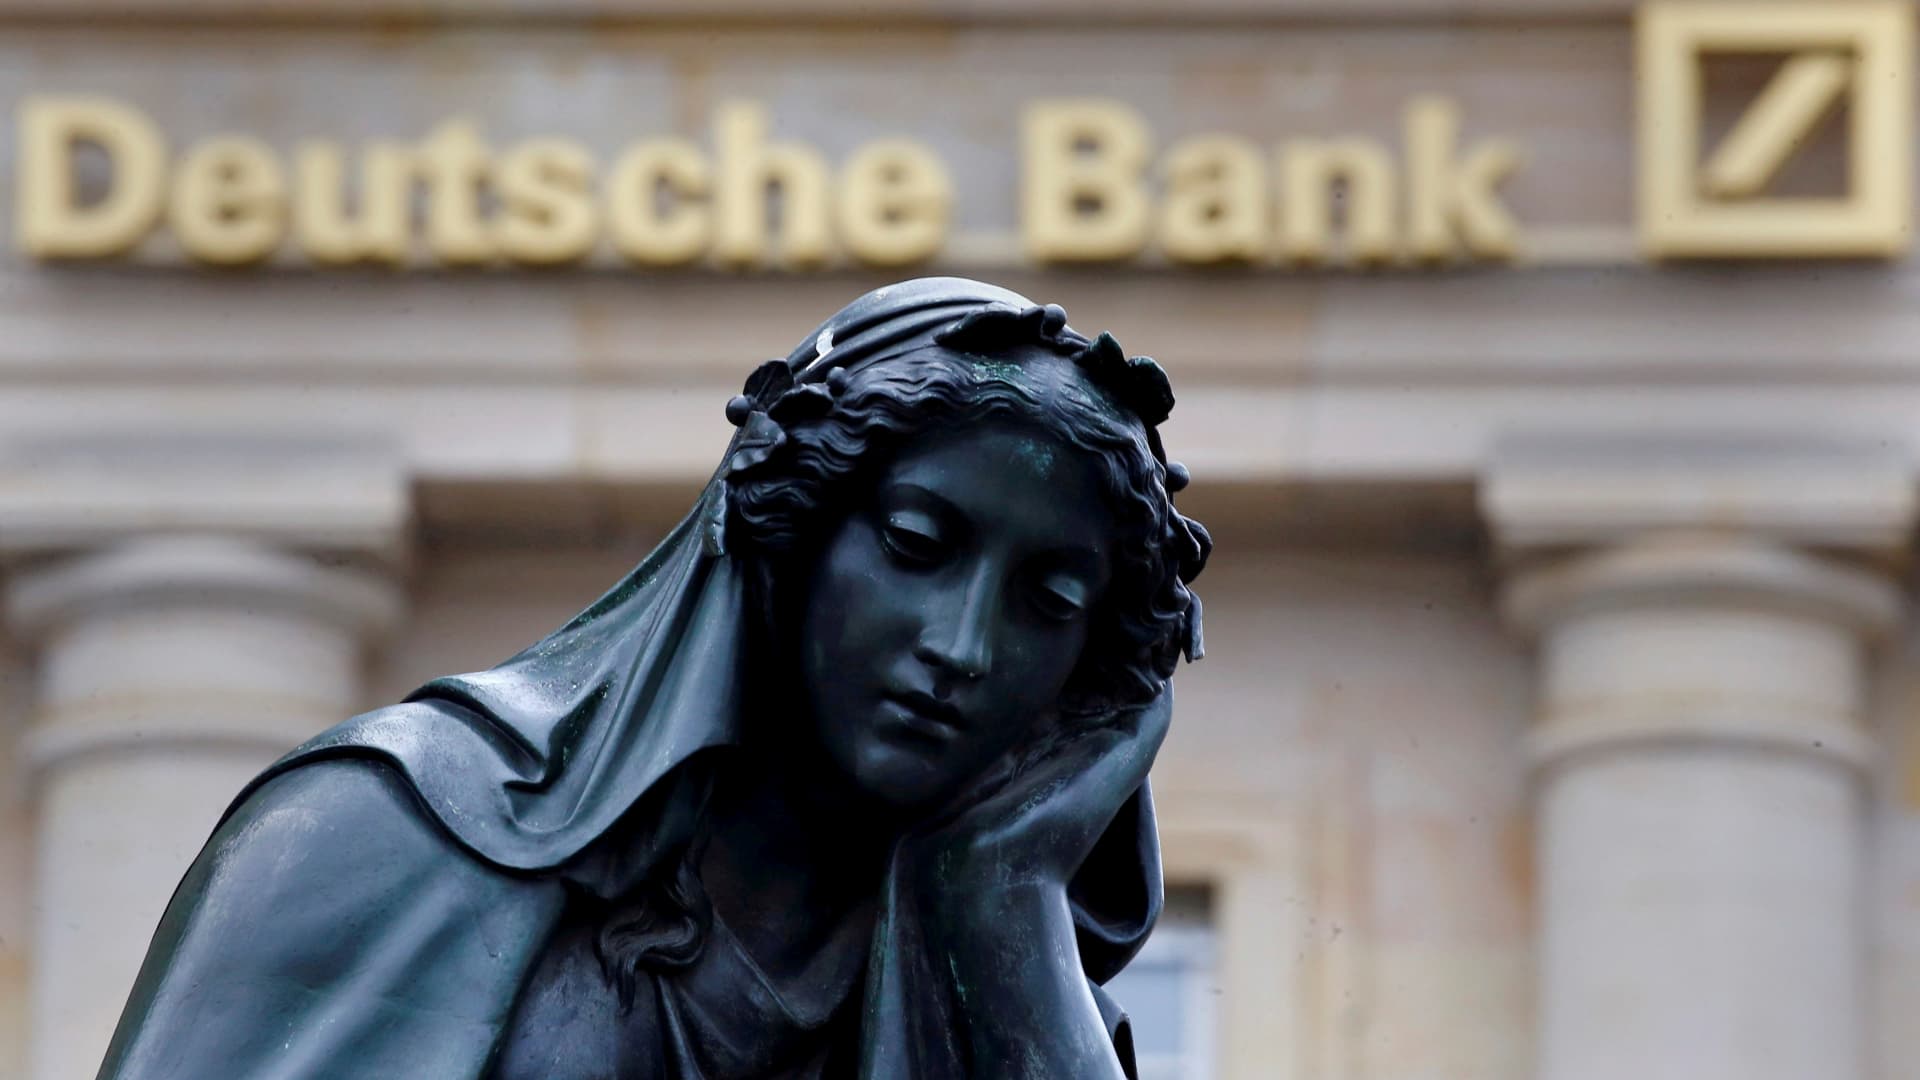 Deutsche Bank shares slide 14% after sudden spike in the cost of insuring against its default